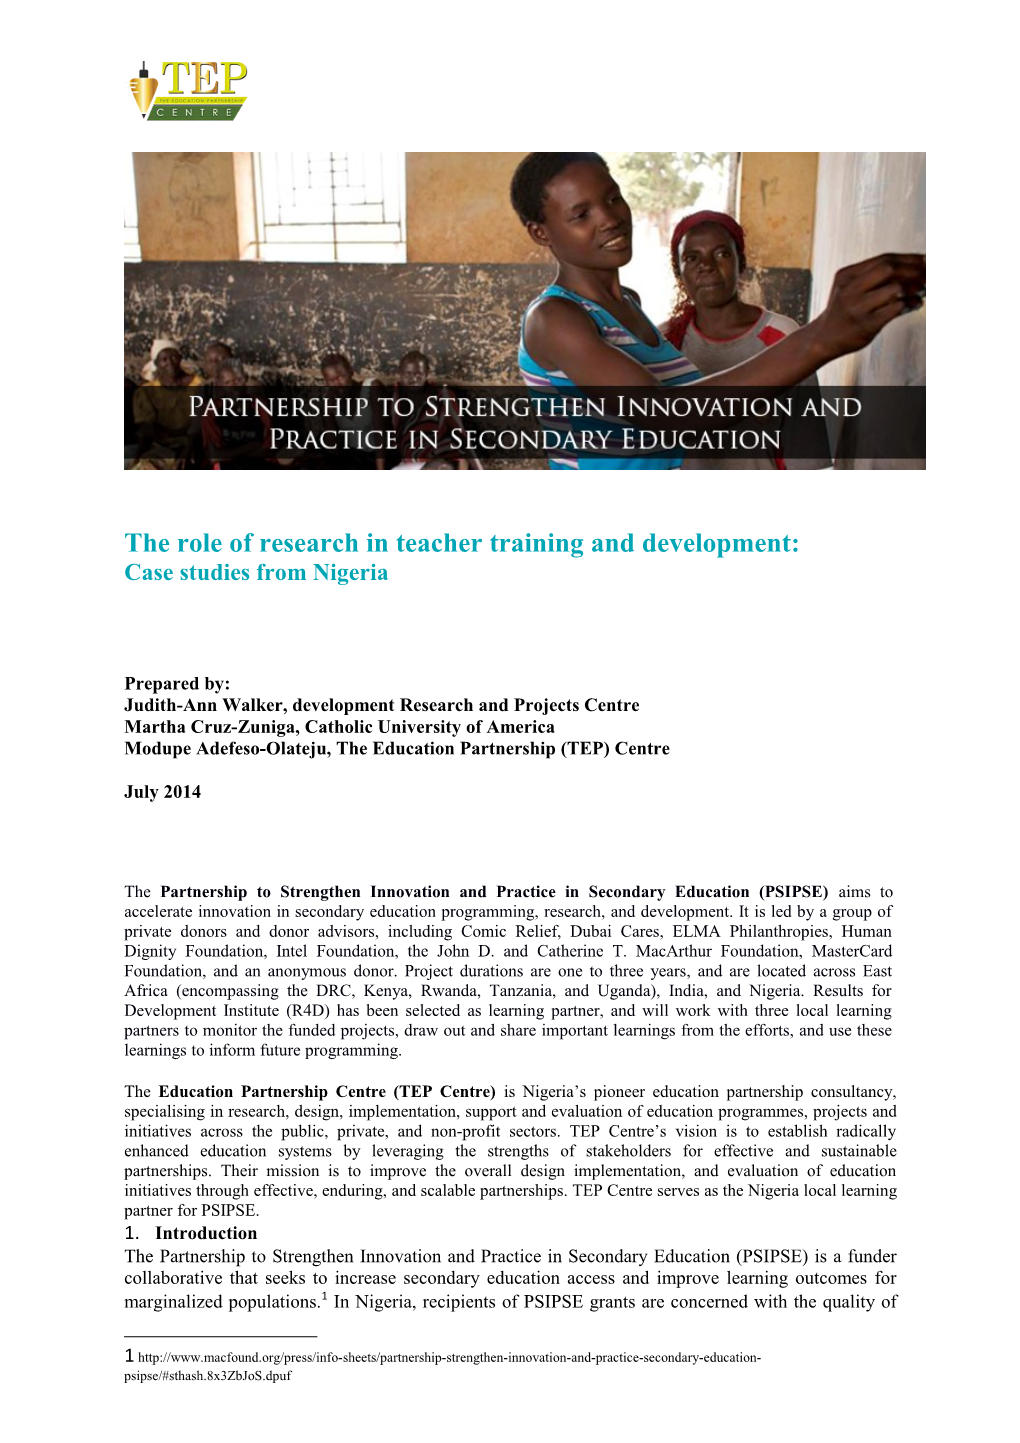 The Role of Research in Teacher Training and Development